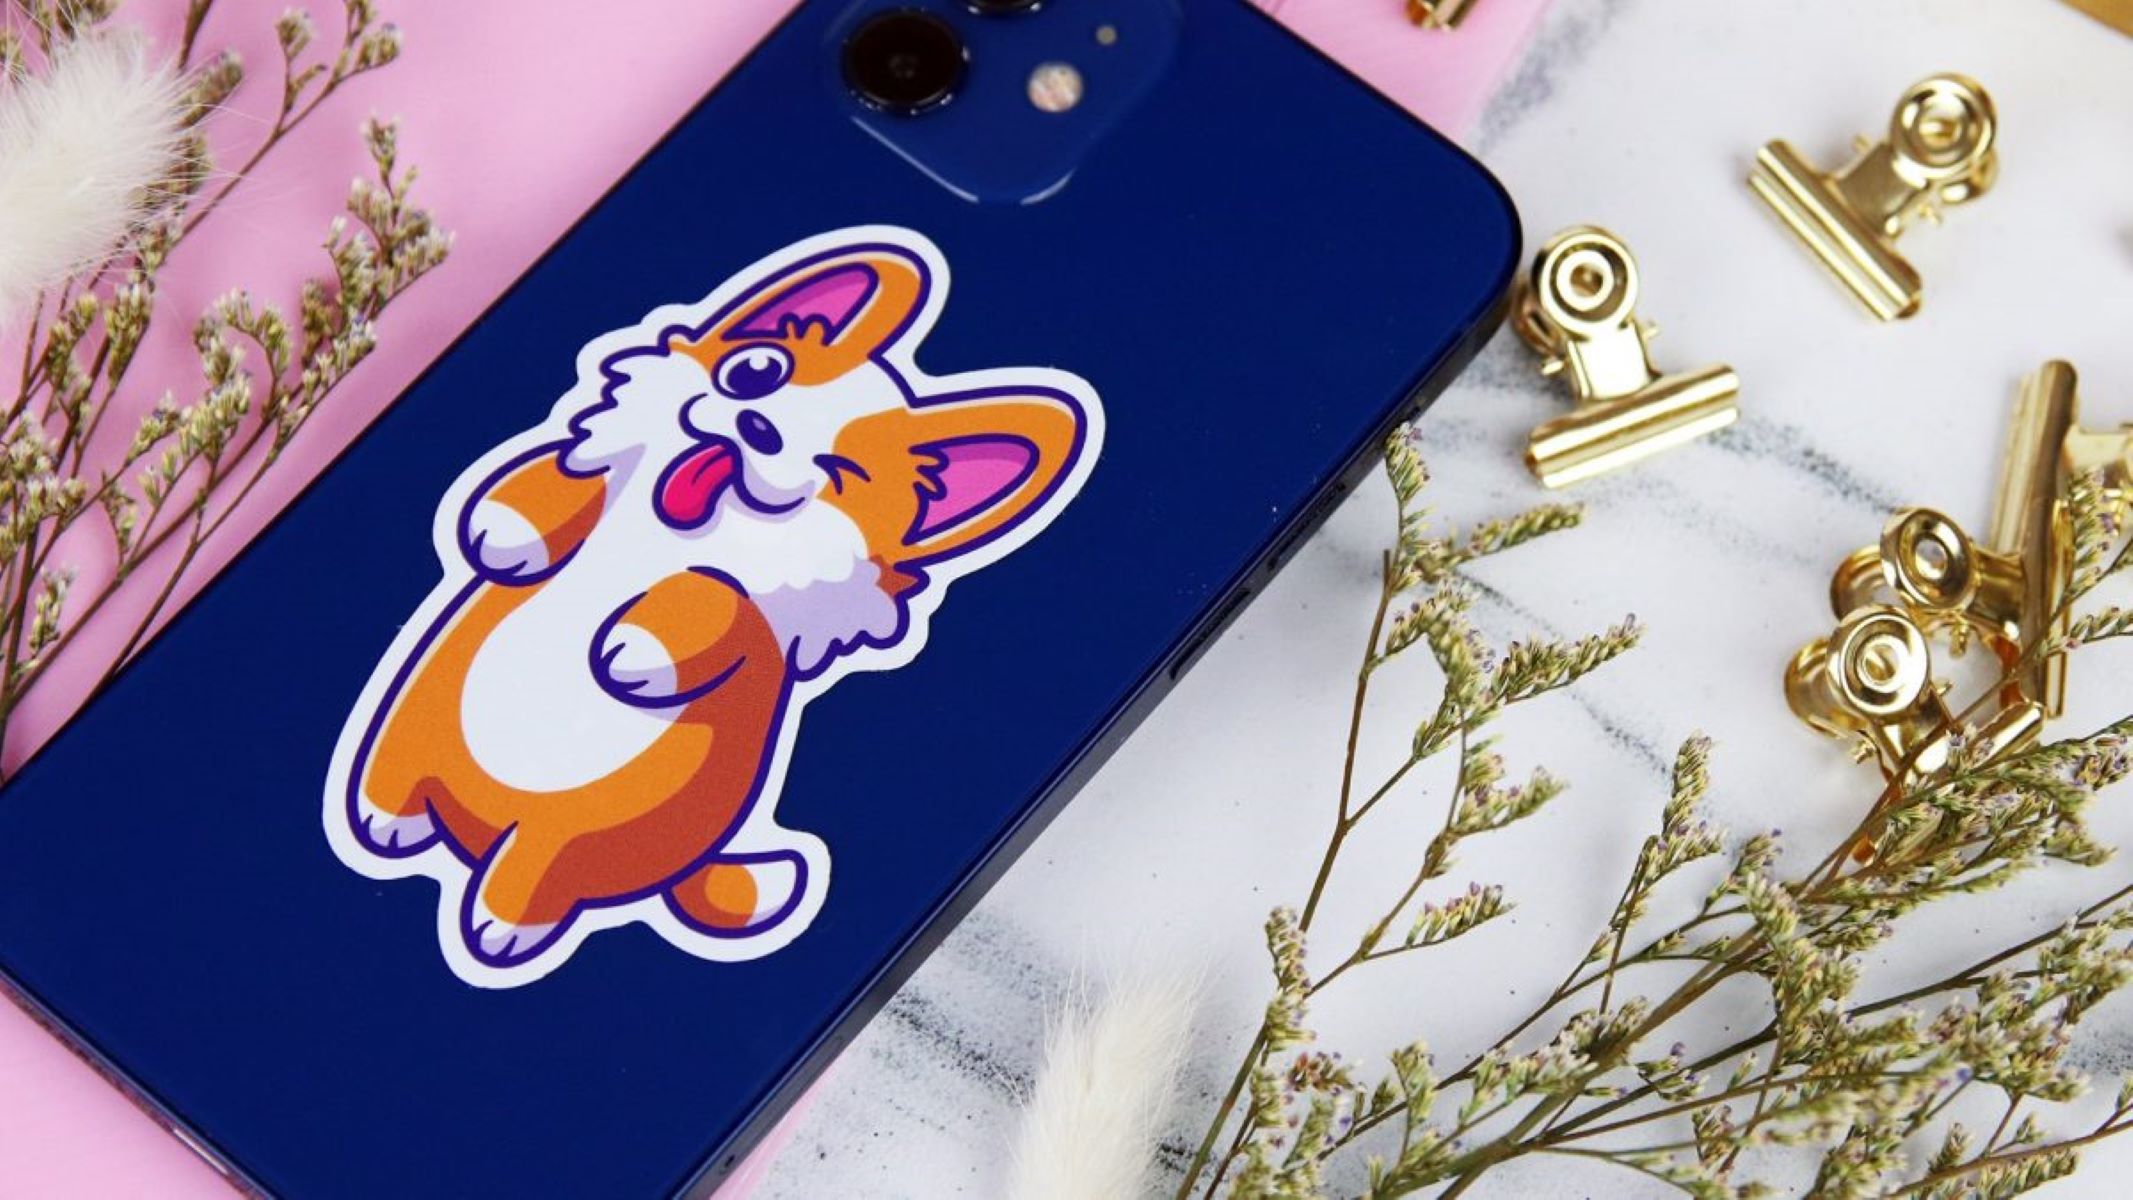 Removing Stickers From Your Phone Case: Step-by-Step Guide